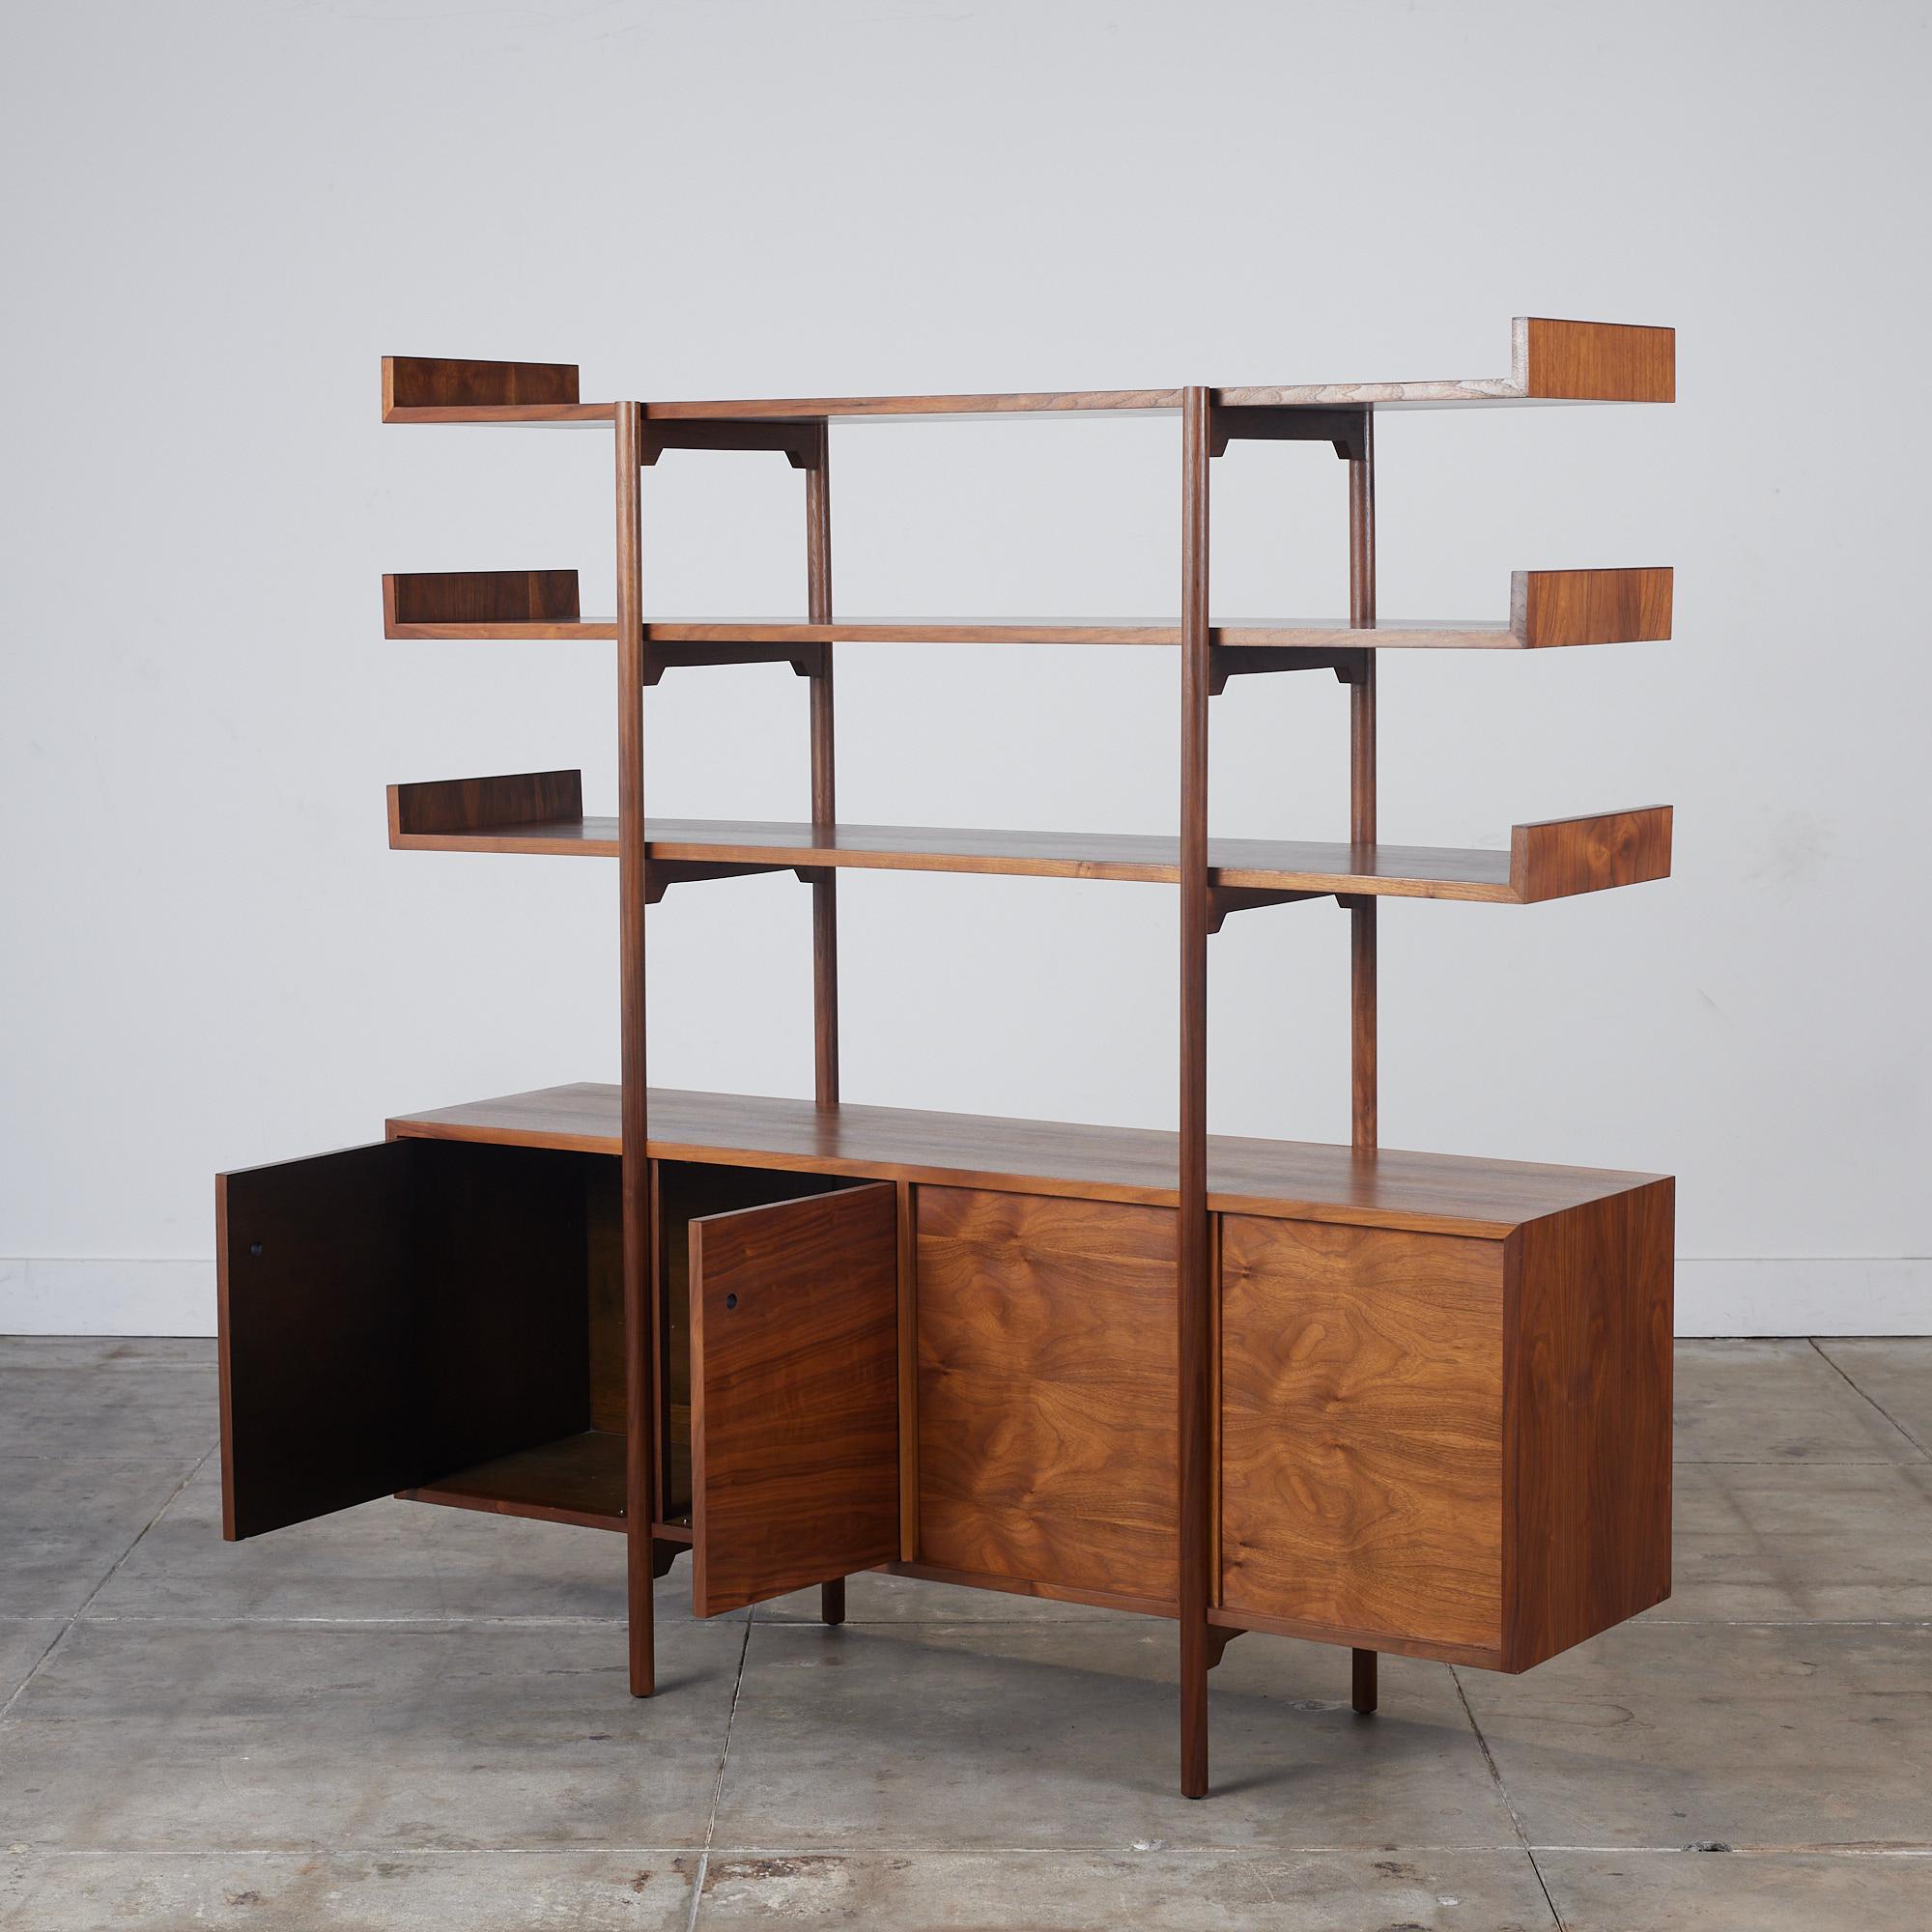 An architectural room divider by Milo Baughman for Glenn of California, c.1950s, USA. This stunning walnut storage unit features three floating shelves that can be used to showcases books and décor. The lower cabinet with adjustable shelving opens